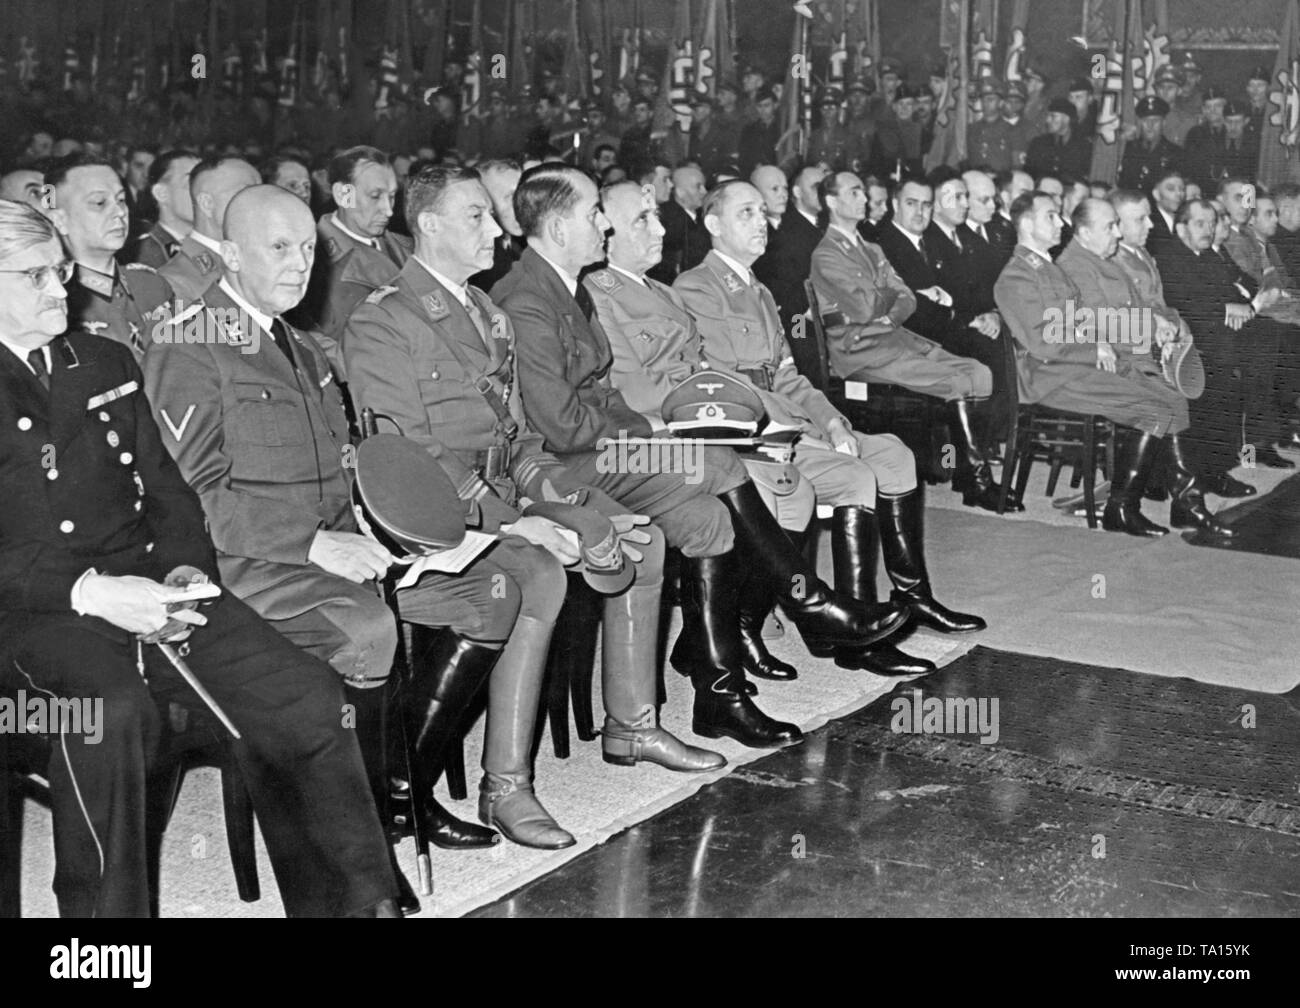 On the evening of January 29, 1943, the NSDAP leaders gathered at an event. First row from left to right: Otto Meissner, Hans Heinrich Lammers, Viktor Lutze, Albert Speer and Robert Ley. Stock Photo